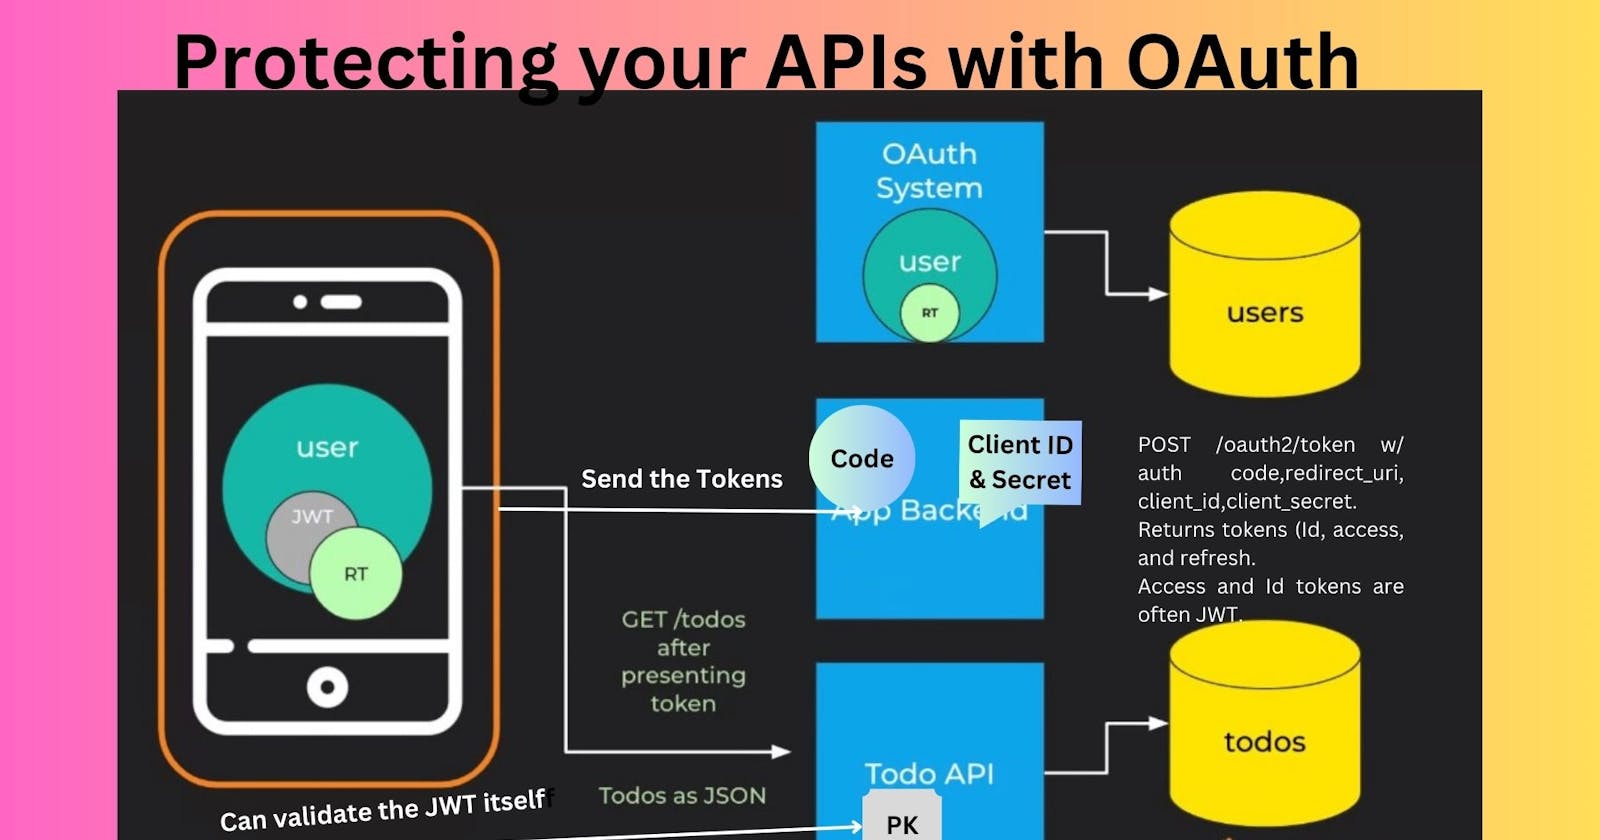 Protecting your APIs with OAuth: Security and Strenght of Access Tokens.